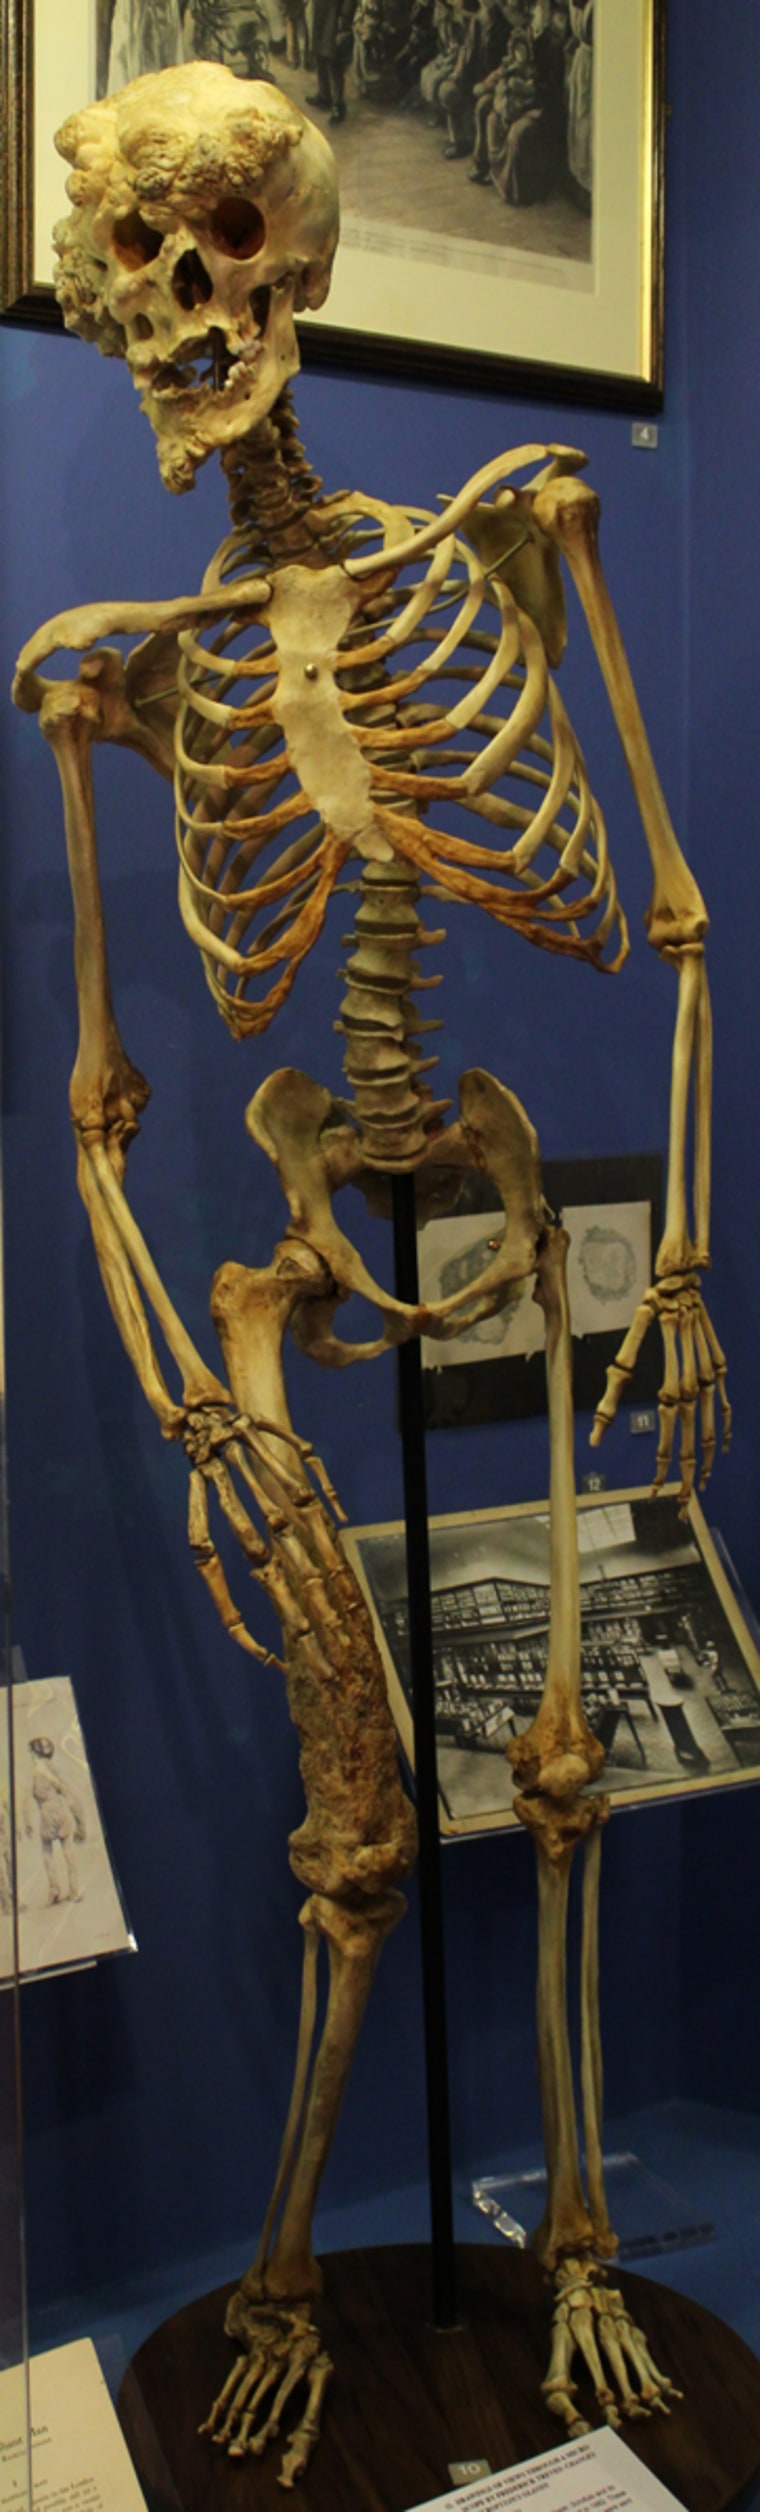 A replica of the skeleton of Joseph Merrick, known as the Elephant Man, at the Royal London Museum.